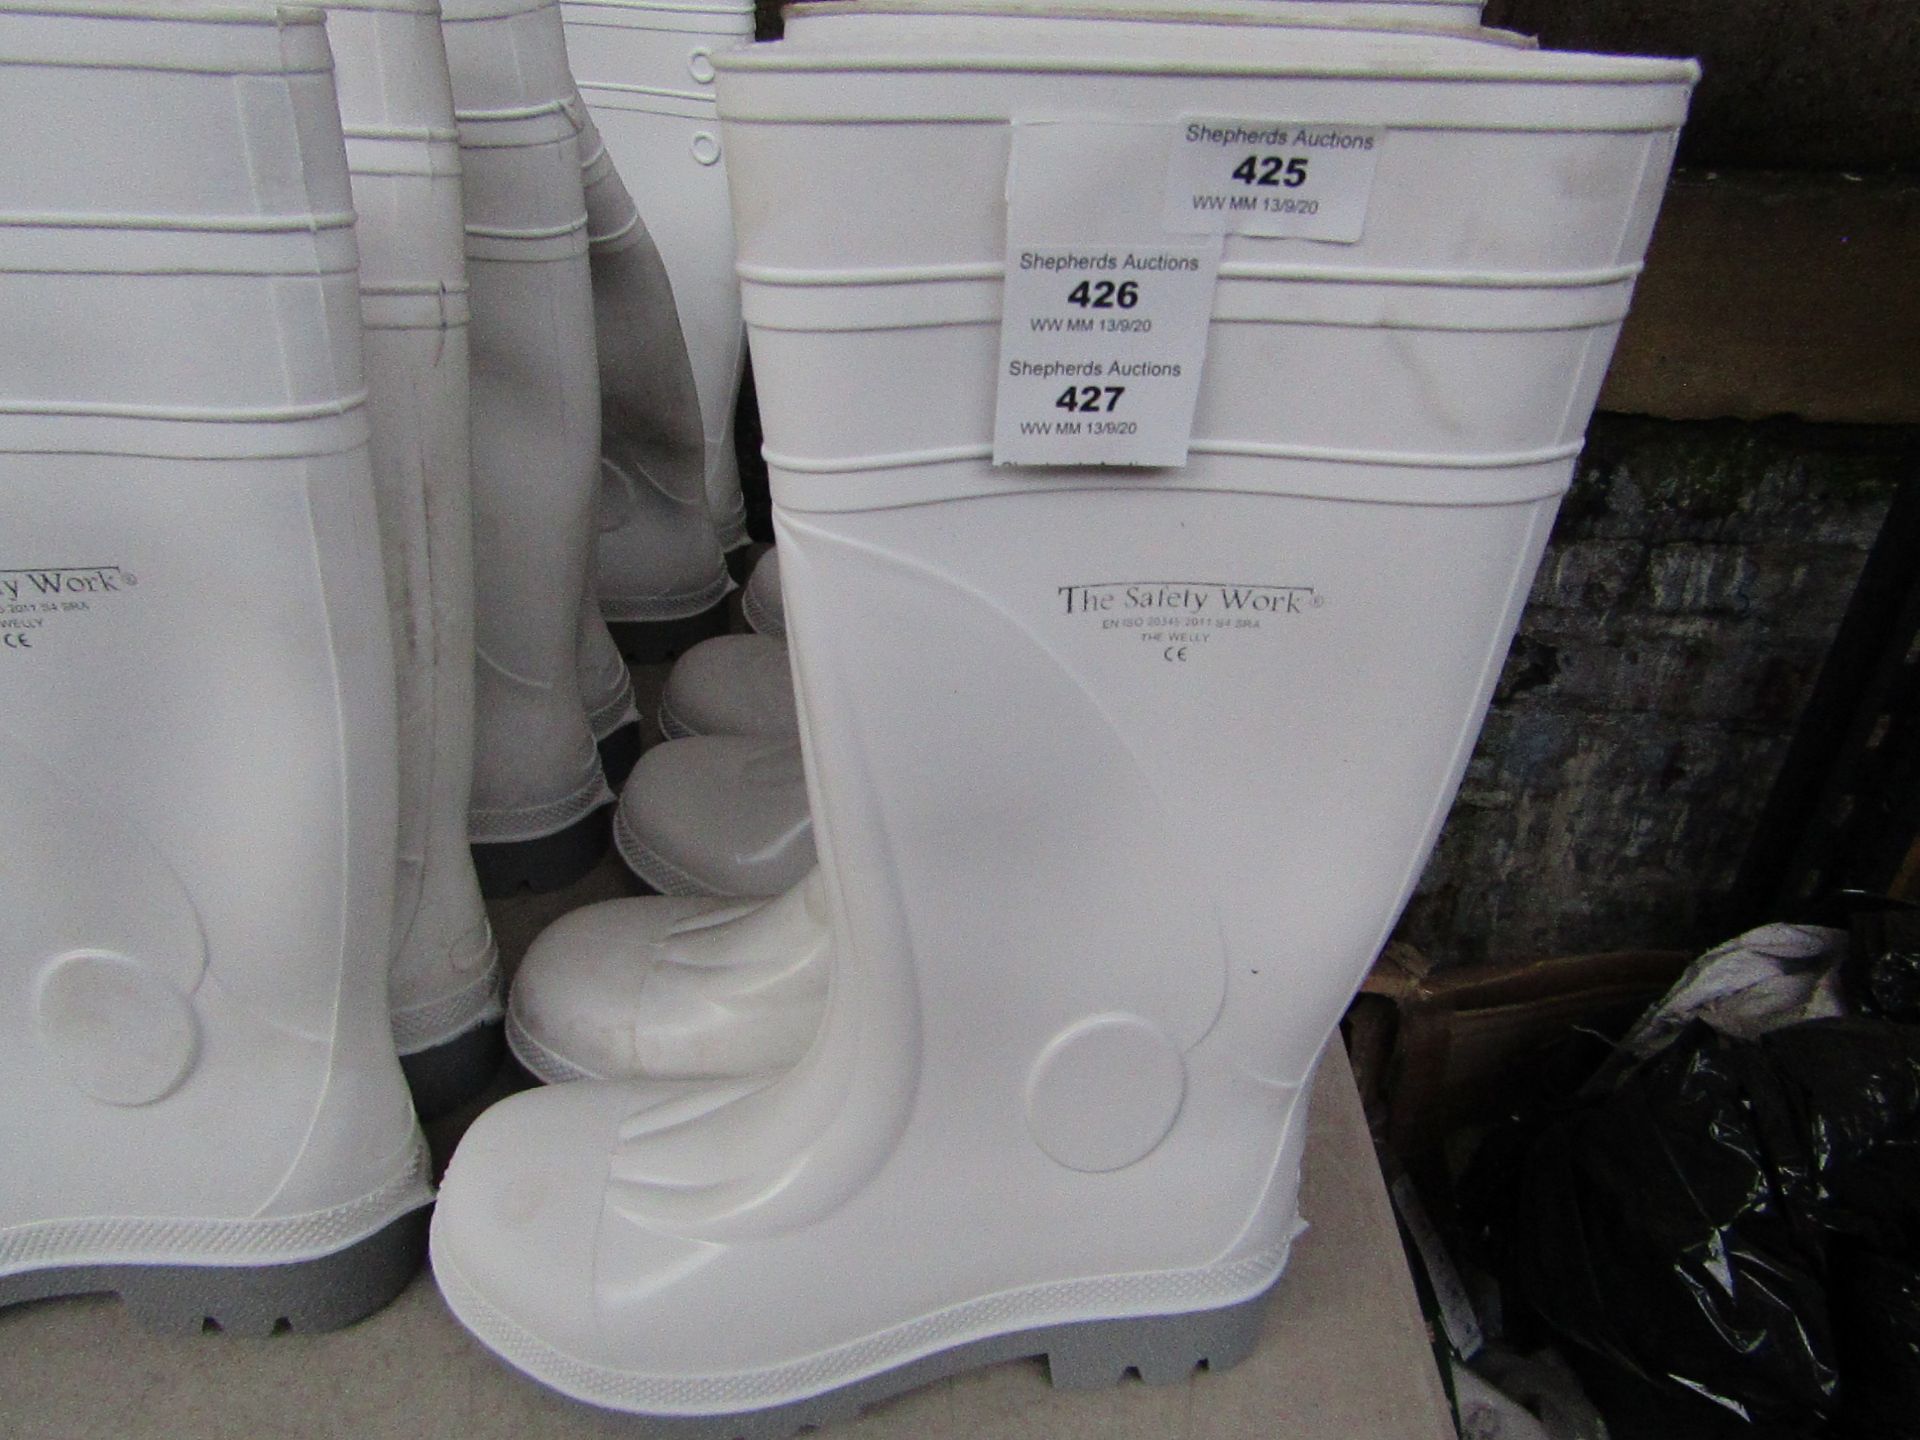 White steel toe cap wellies - Size 5 - New & Packaged.